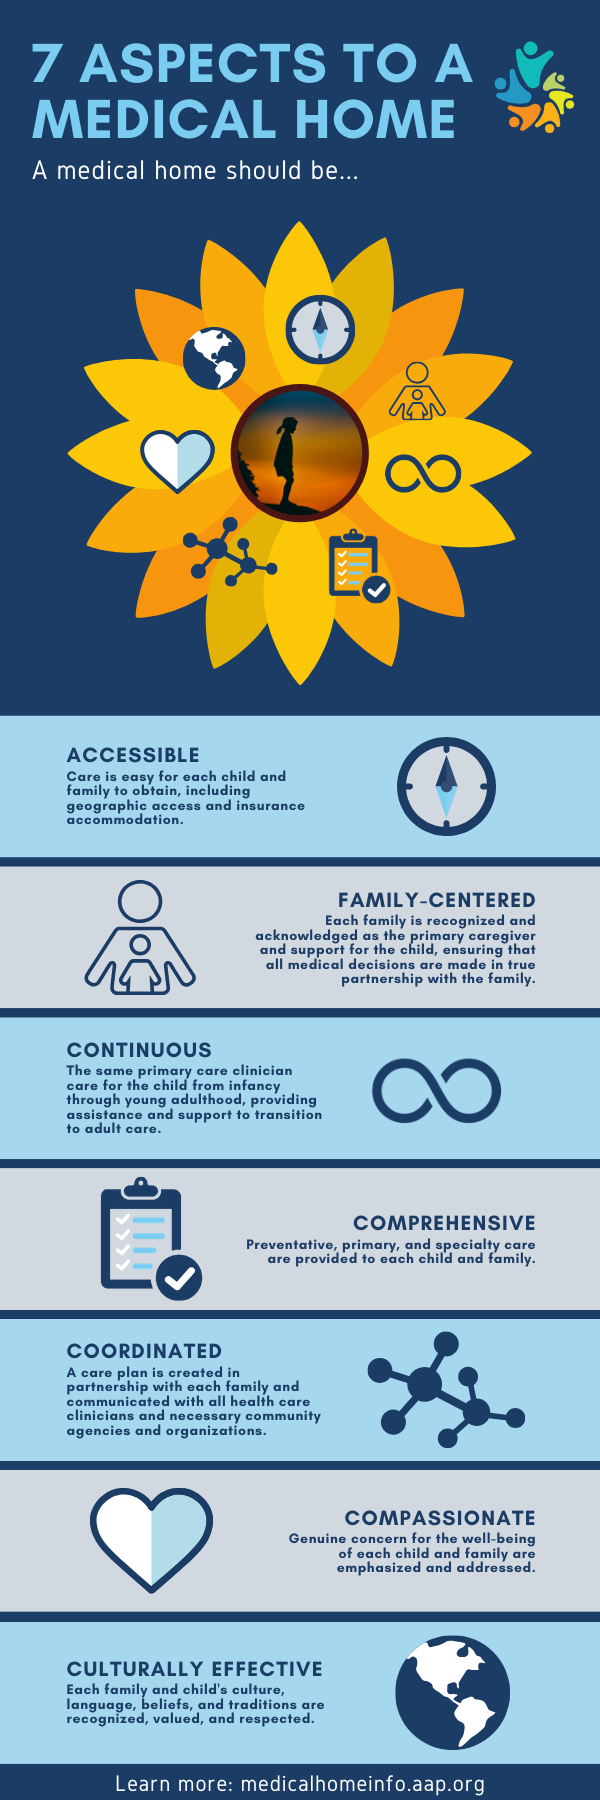 7 Aspects to a Medical Home - Infographic